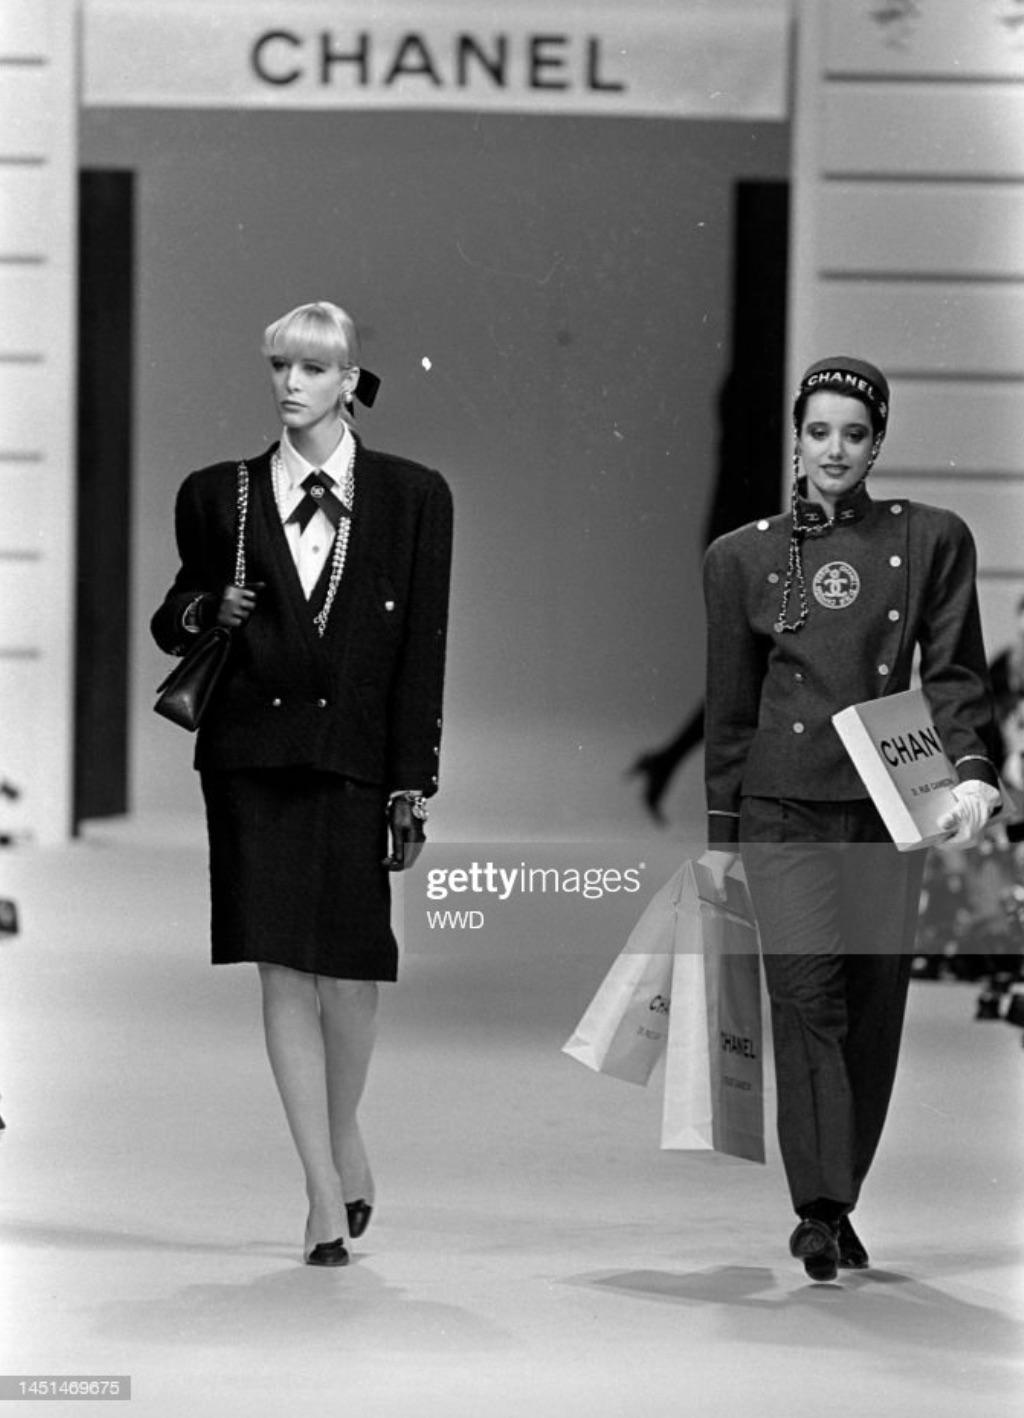 This black tweed Chanel skirt suit from Fall/Winter 1985 collection is an iconic example of 1980s fashion. Adorned with dual button pockets at the chest, dual slit pockets at the front and gold-tone CC buttons, this classic suit is guaranteed to